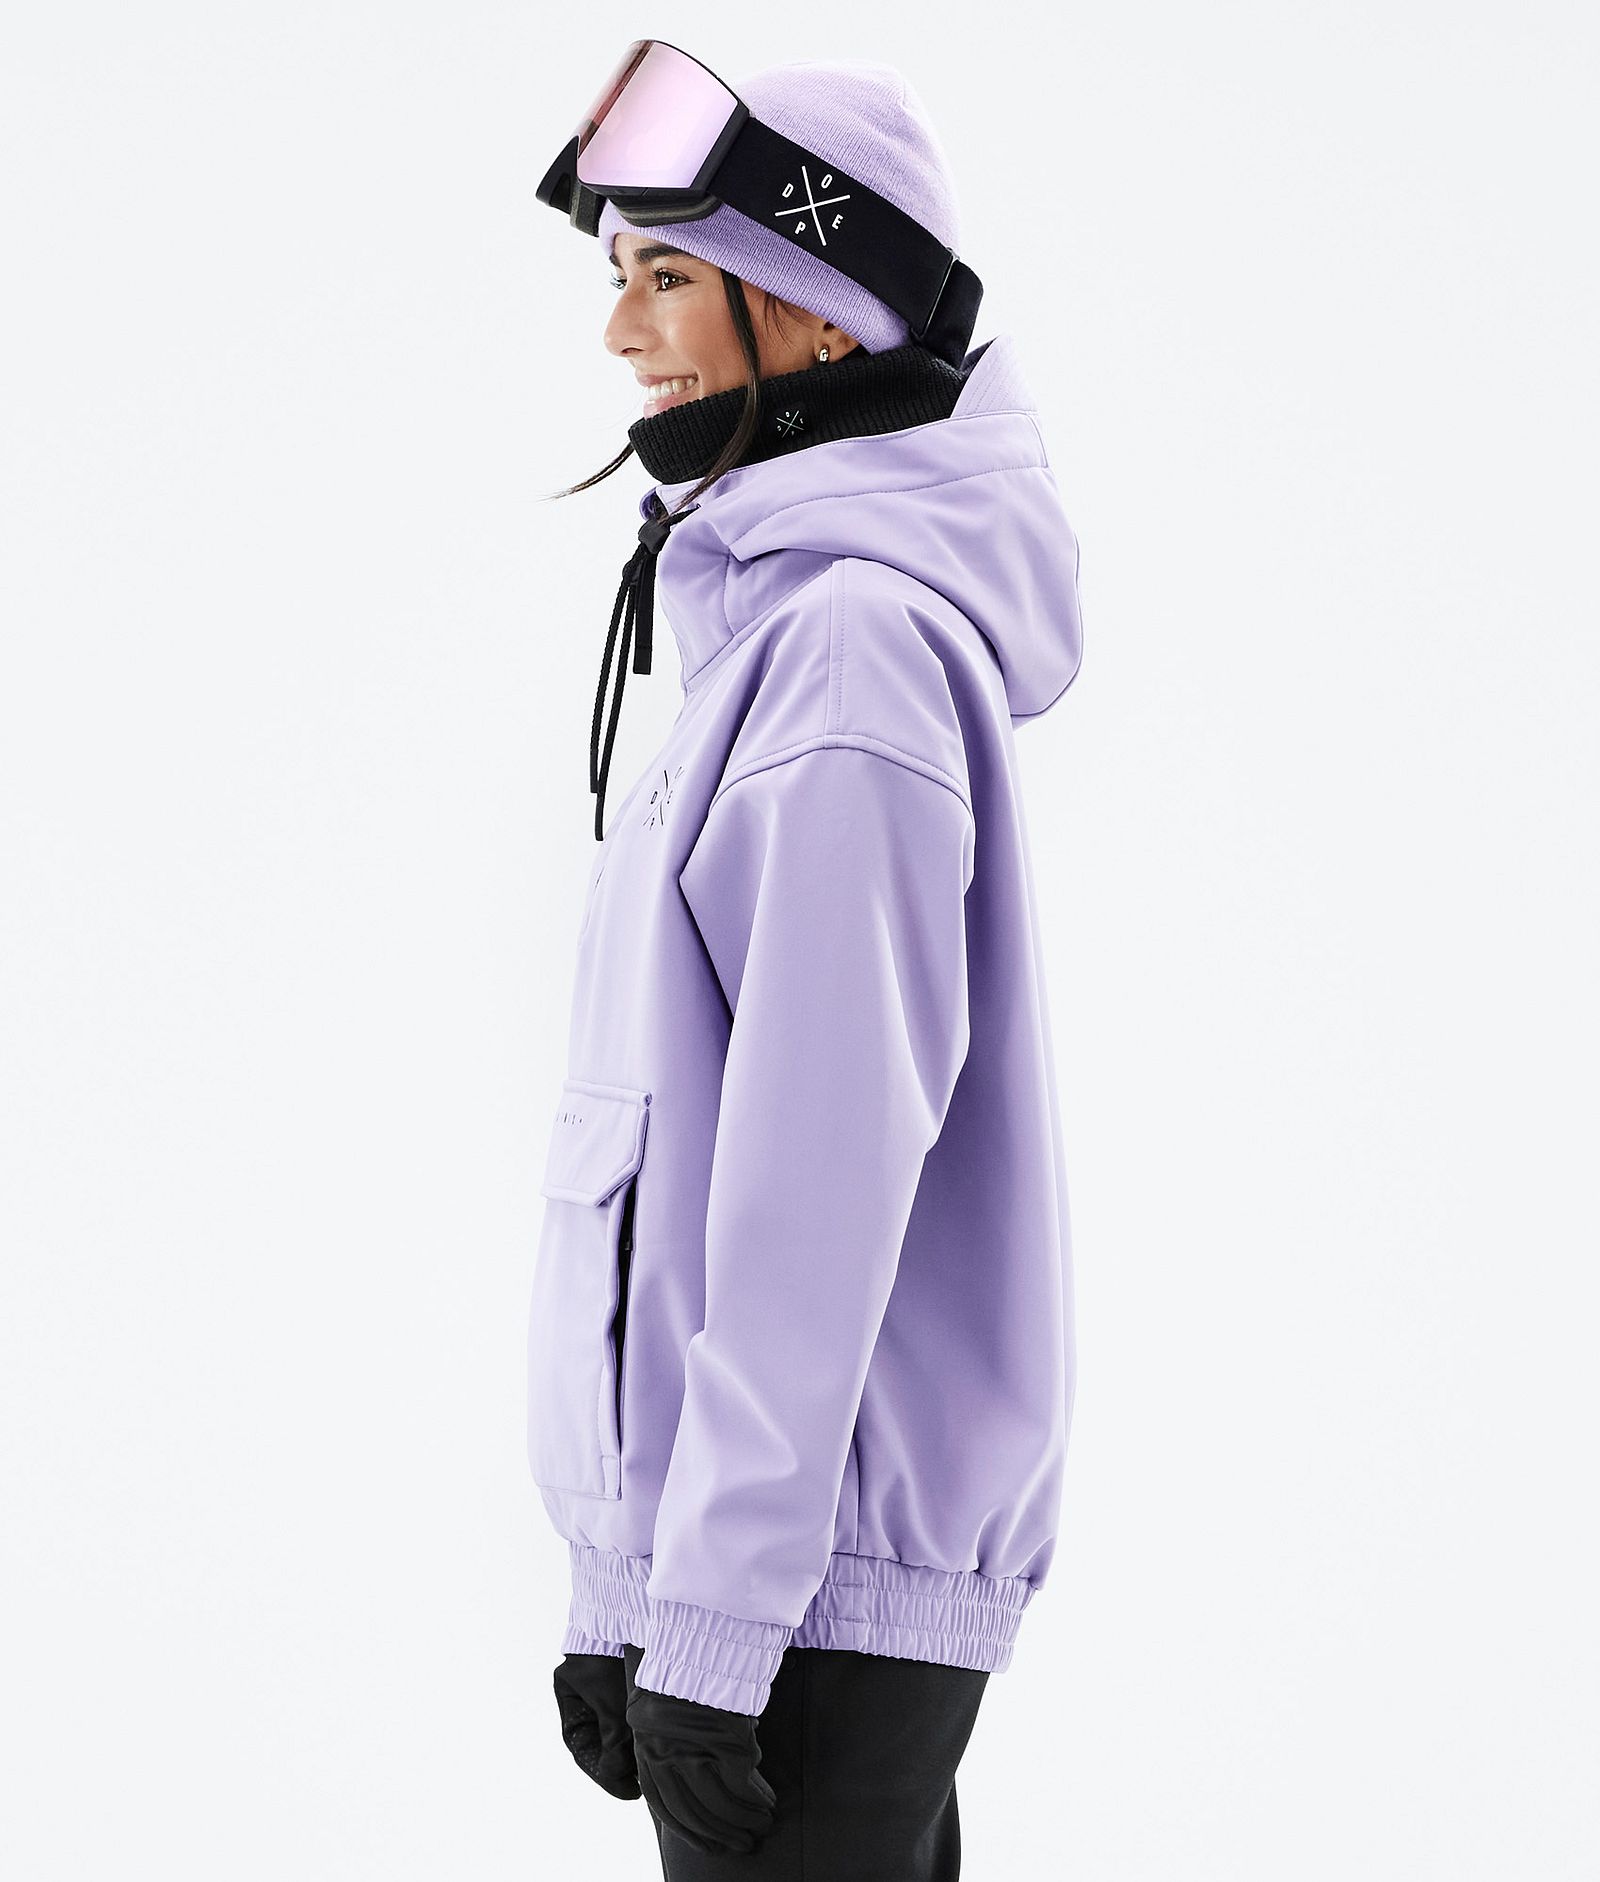 Cyclone W 2022 Ski Jacket Women Faded Violet, Image 6 of 9